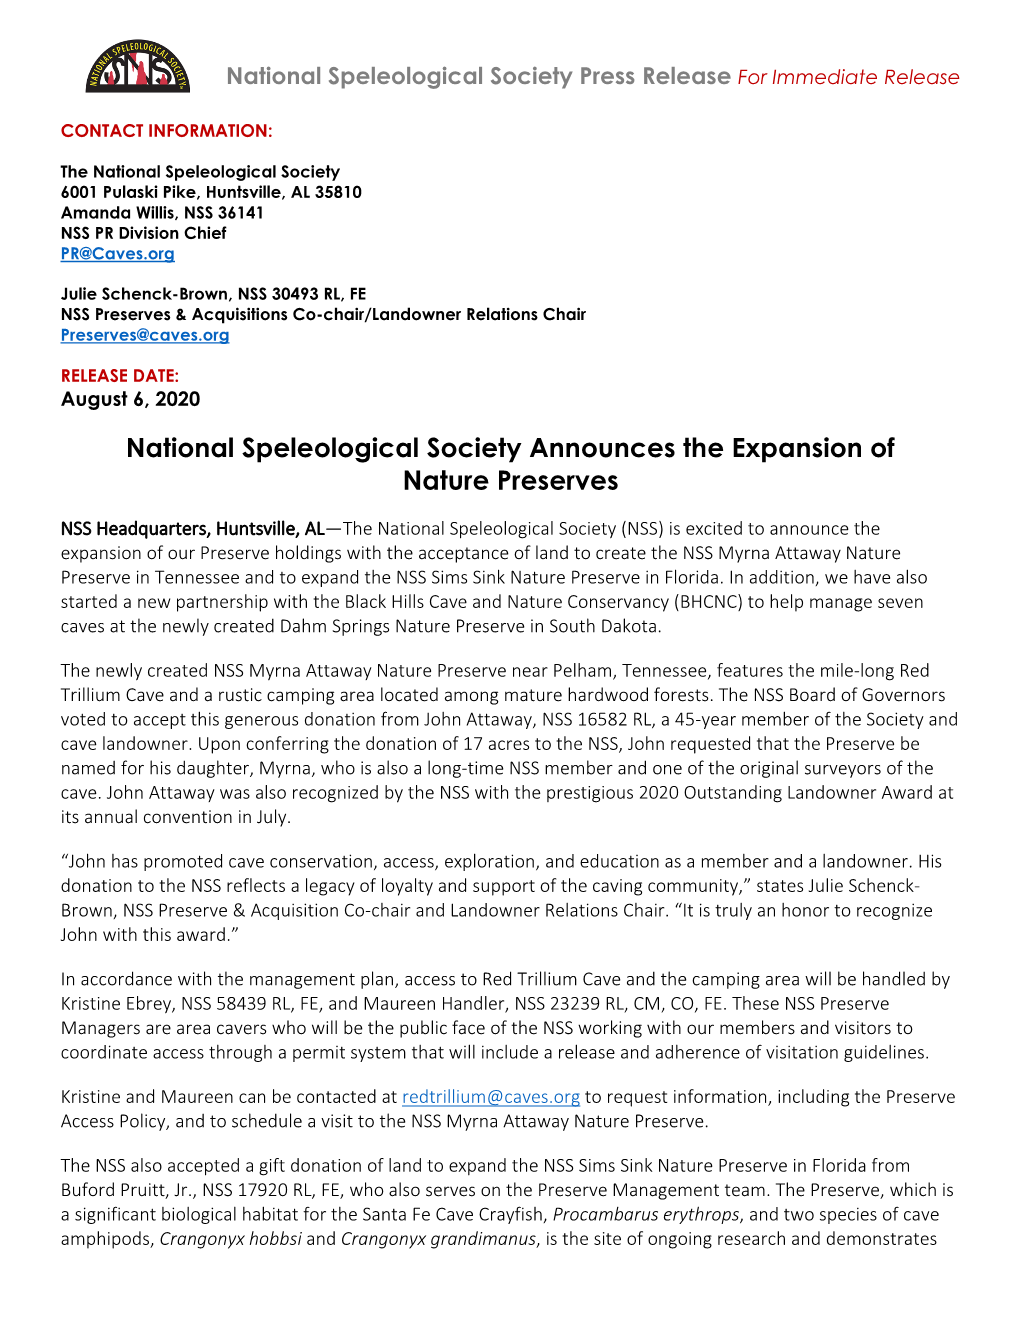 National Speleological Society Announces the Expansion of Nature Preserves